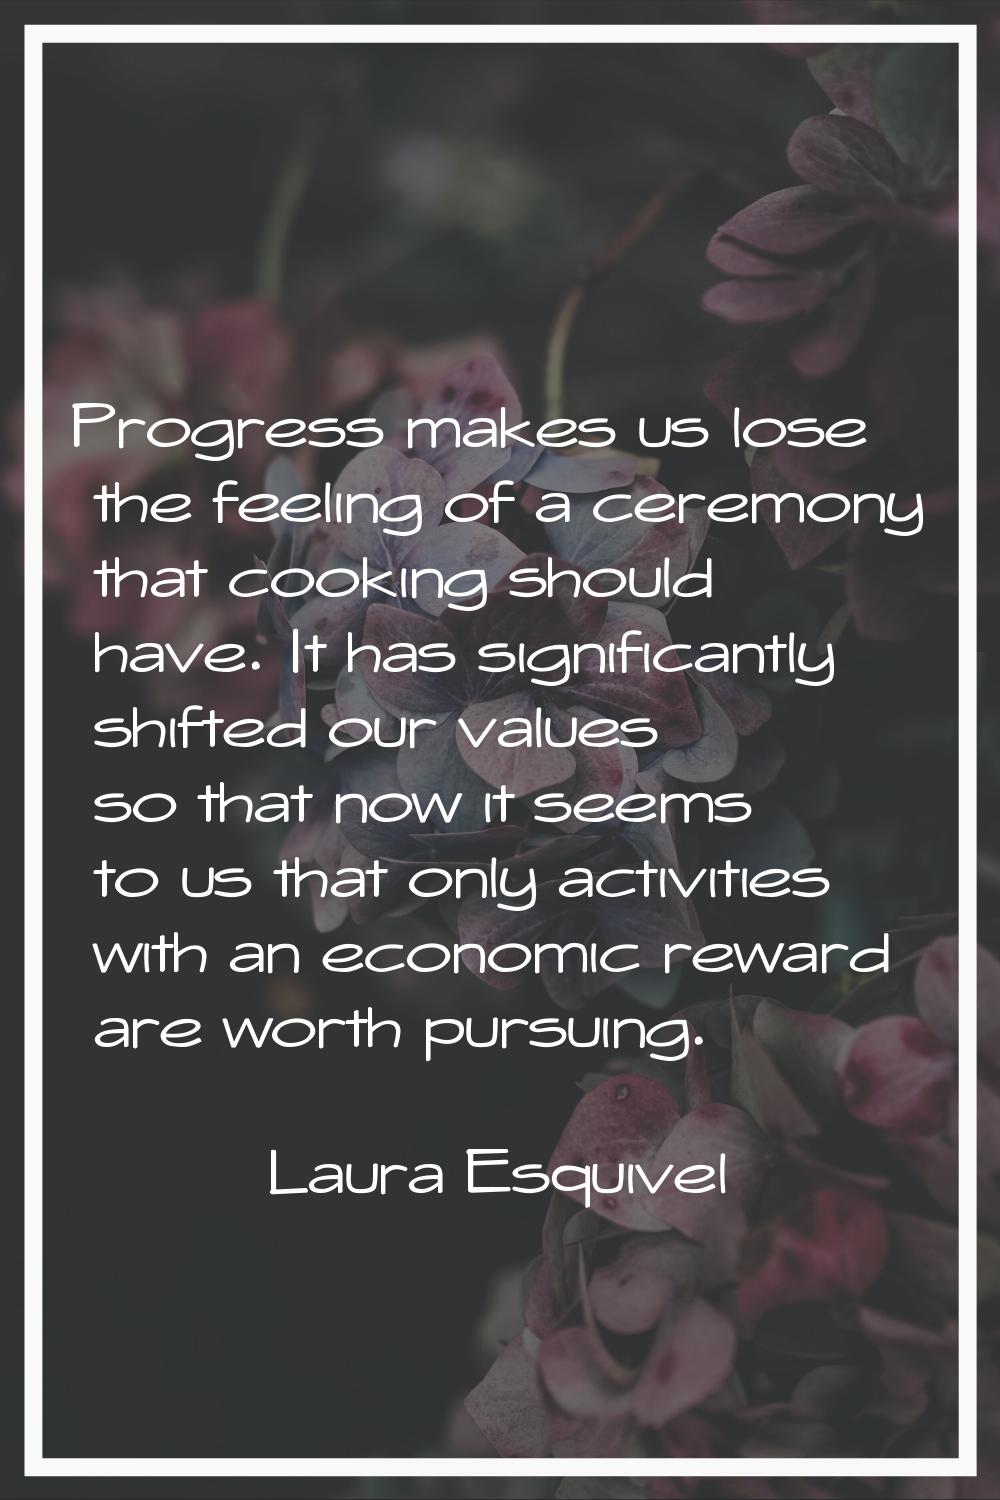 Progress makes us lose the feeling of a ceremony that cooking should have. It has significantly shi